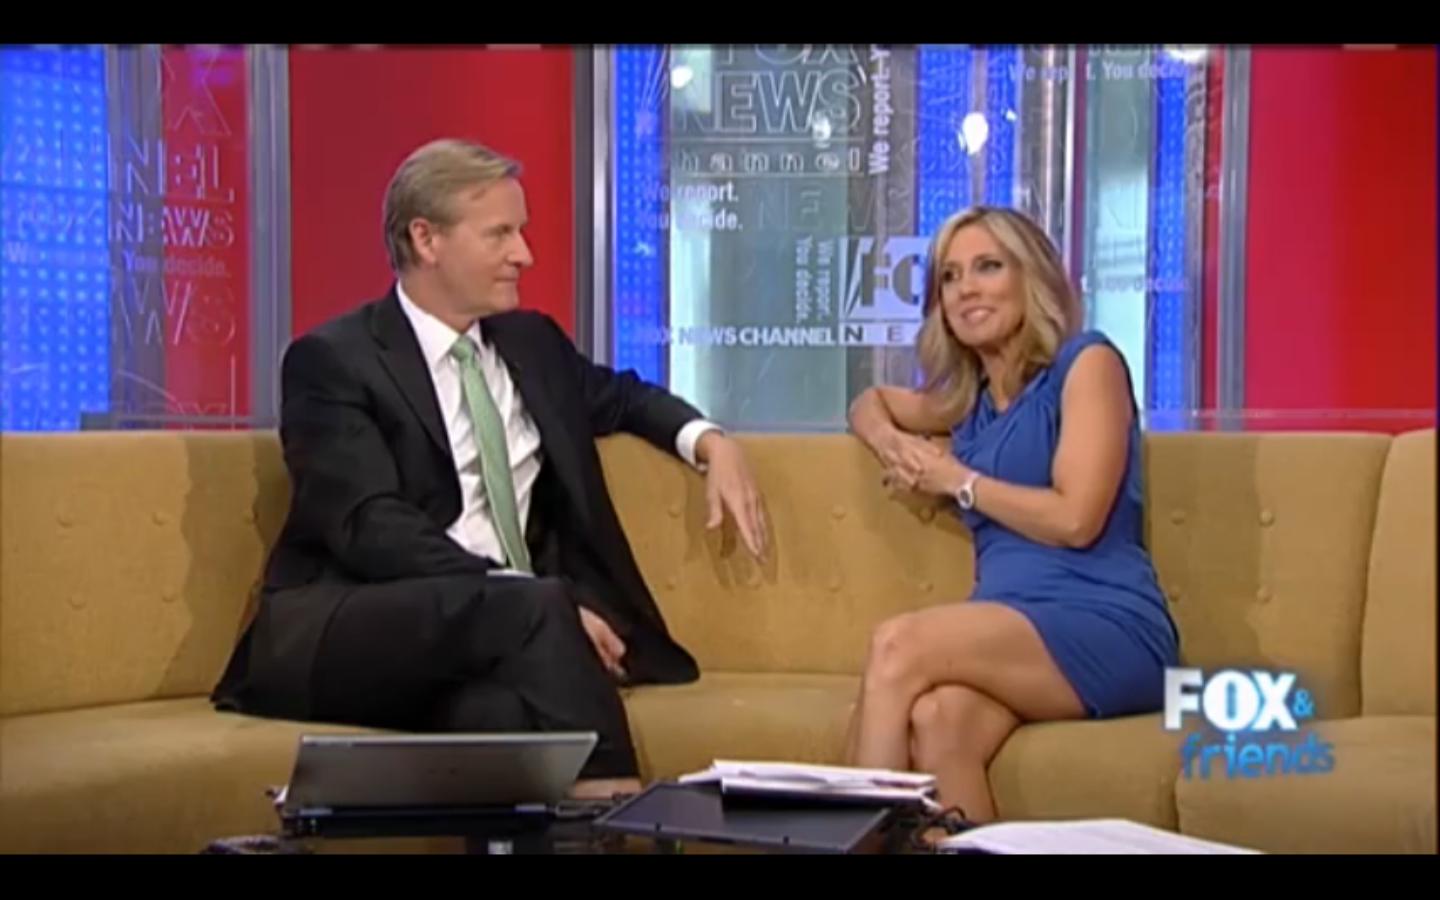 More Alisyn Camerota legs on the Fox & Friends couch - Sexy Leg Cross